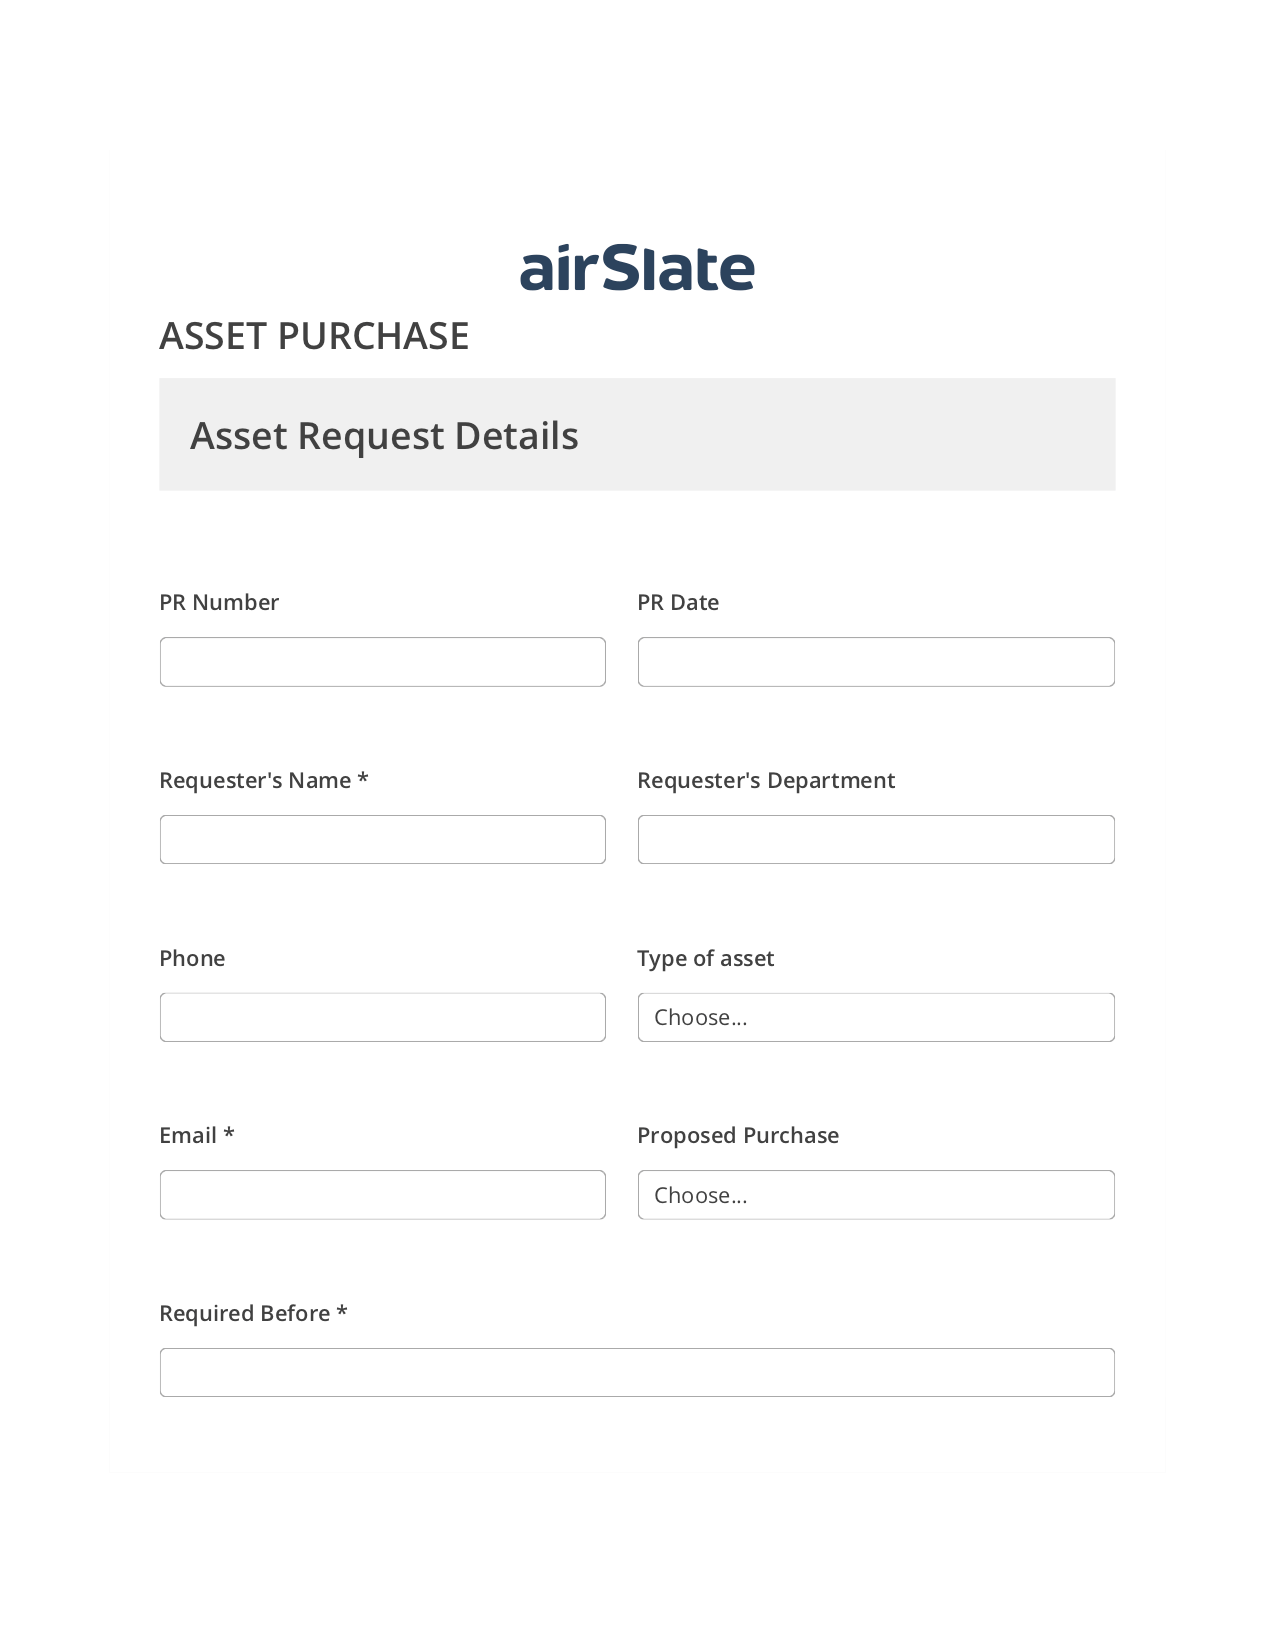 Asset Purchase Flow Unassign Role Bot